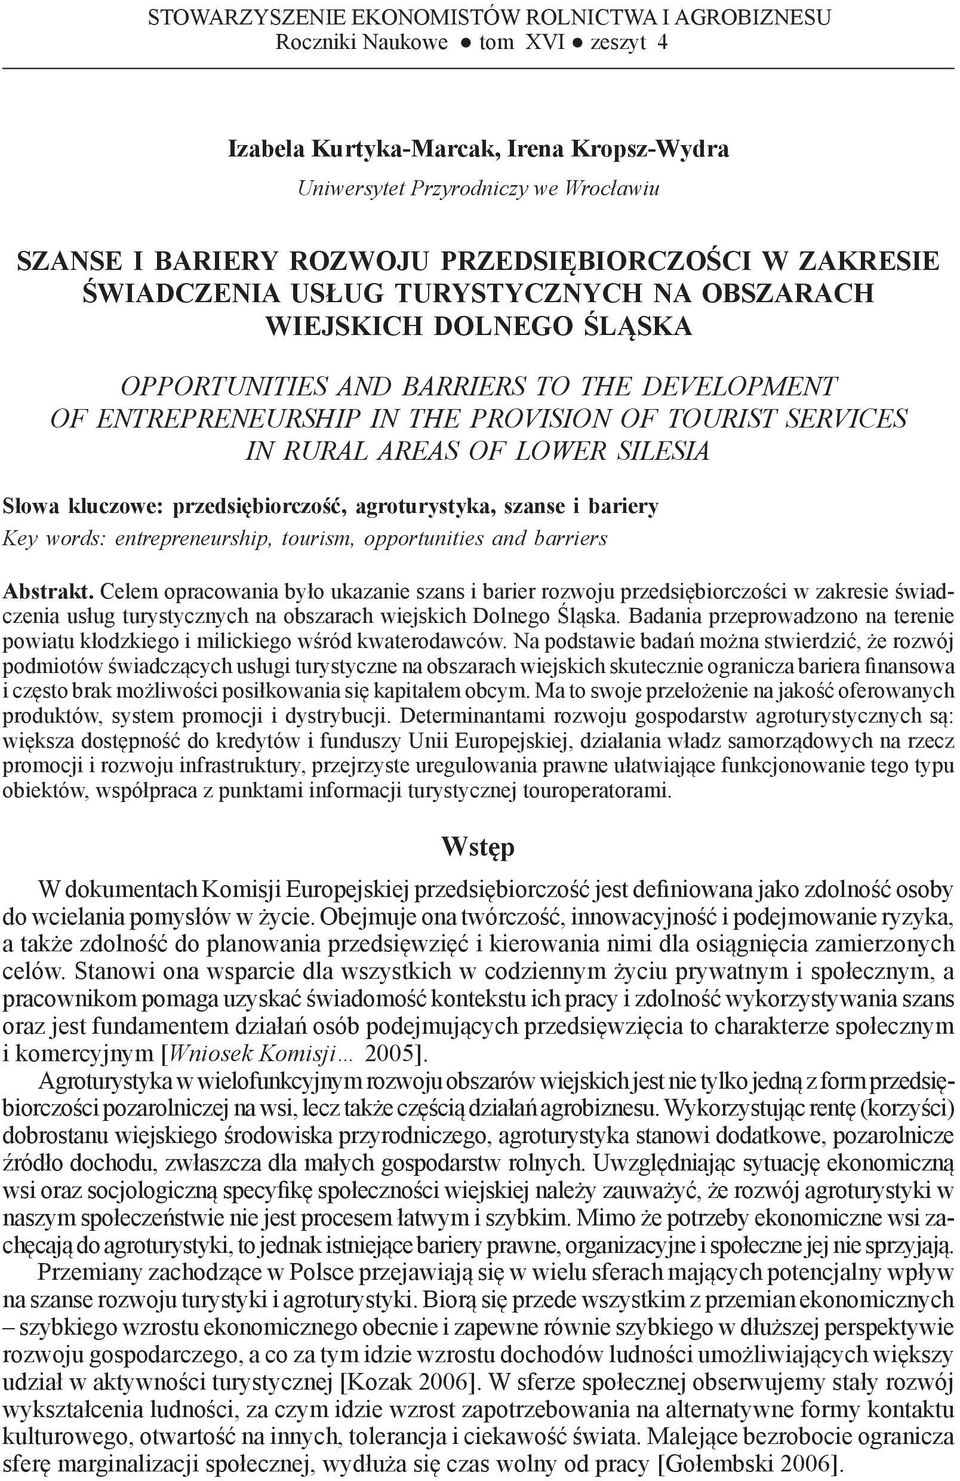 turystycznych na obszarach wiejskich Dolnego Śląska OPPORTUNITIES AND BARRIERS TO THE DEVELOPMENT OF ENTREPRENEURSHIP IN THE PROVISION OF TOURIST SERVICES IN RURAL AREAS OF LOWER SILESIA Słowa